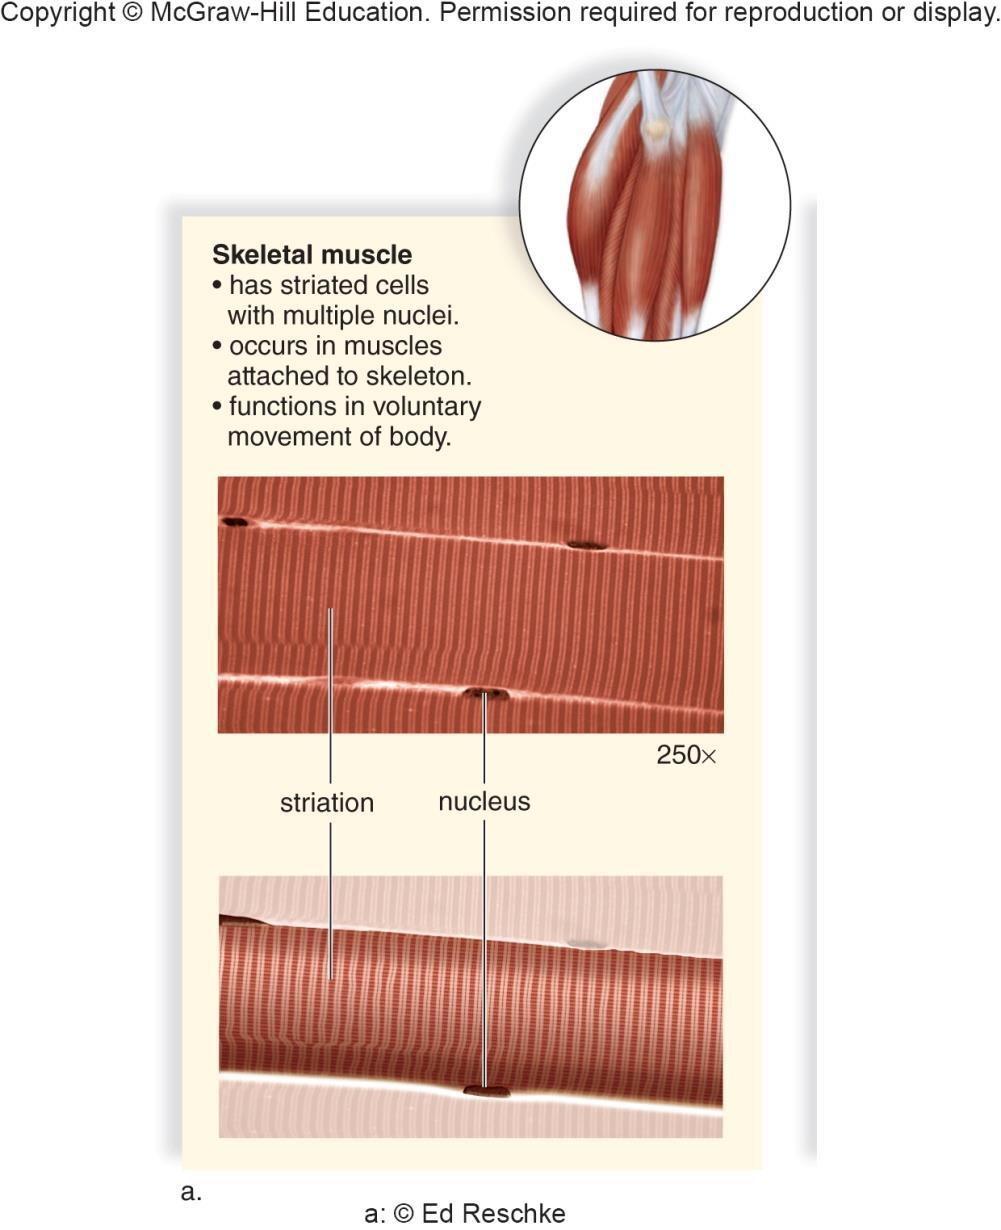 Muscle Tissue Skeletal (striated) muscle Moves body parts Heat production (shivering thermogenesis Voluntary, multinucleated